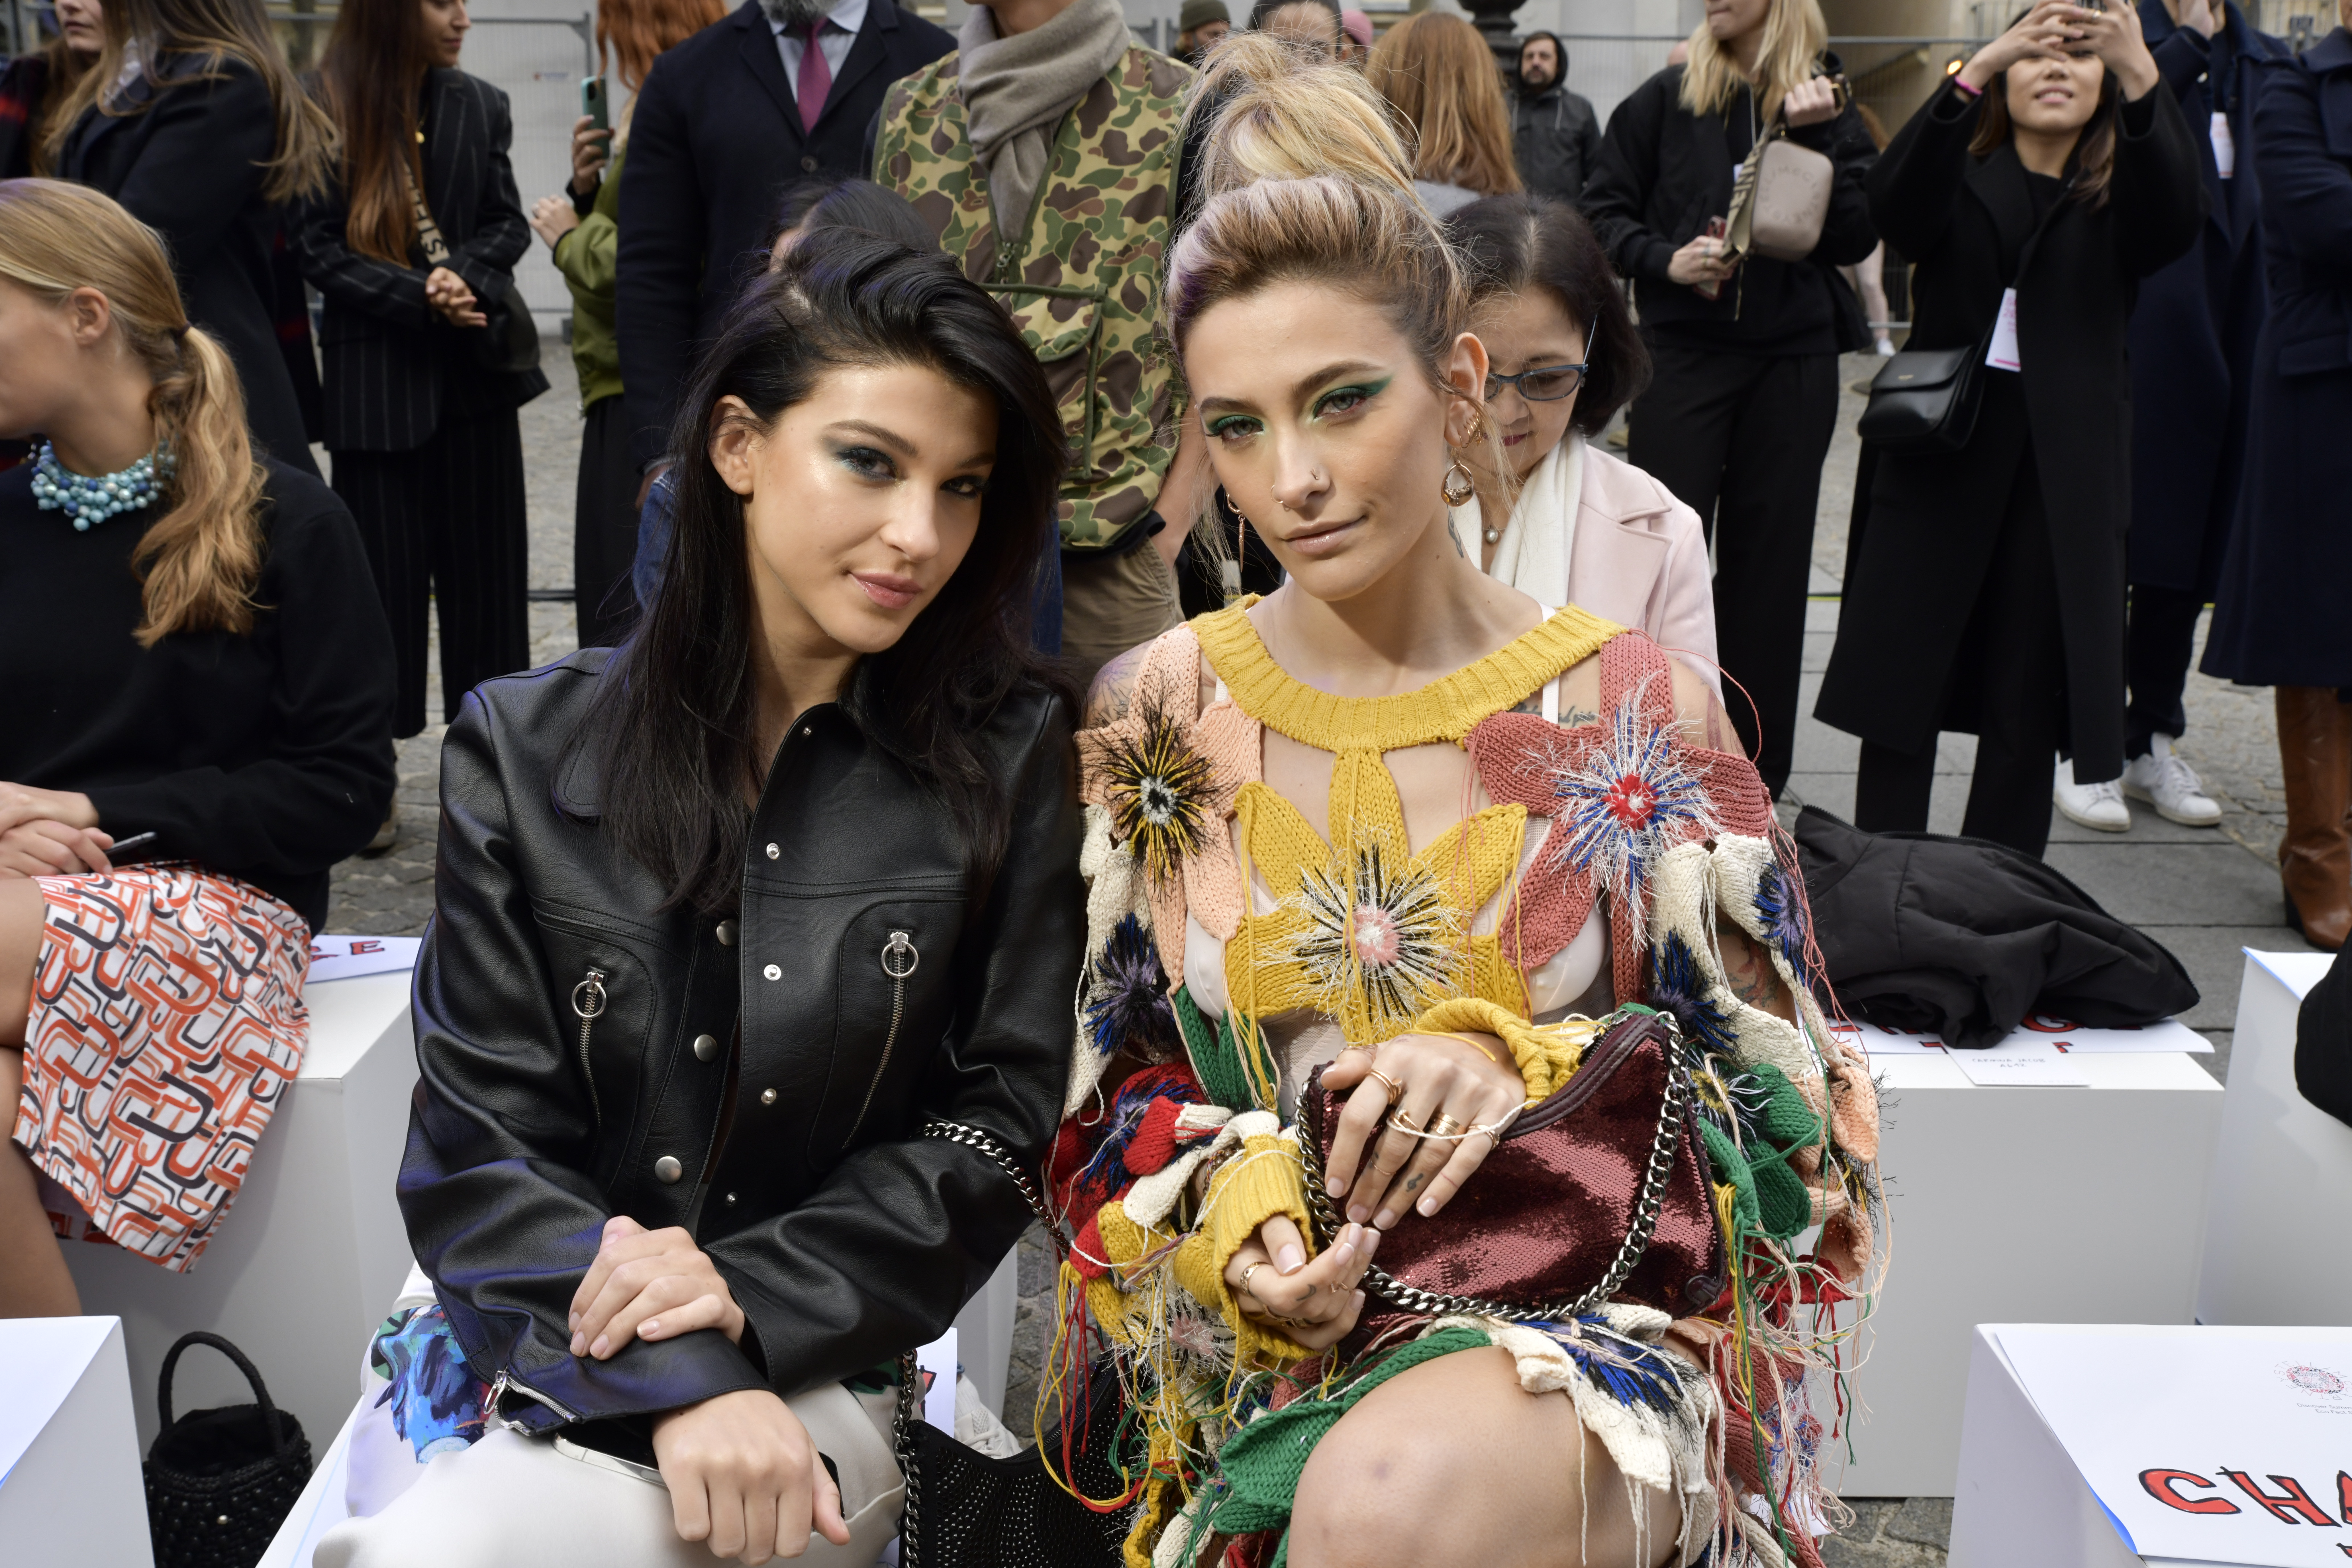 Phoebe Gates and Paris Jackson in Front Row at the Stella McCartney RTW Spring 2023 fashion show in Paris, France on October 03, 2022 | Source: Getty Images